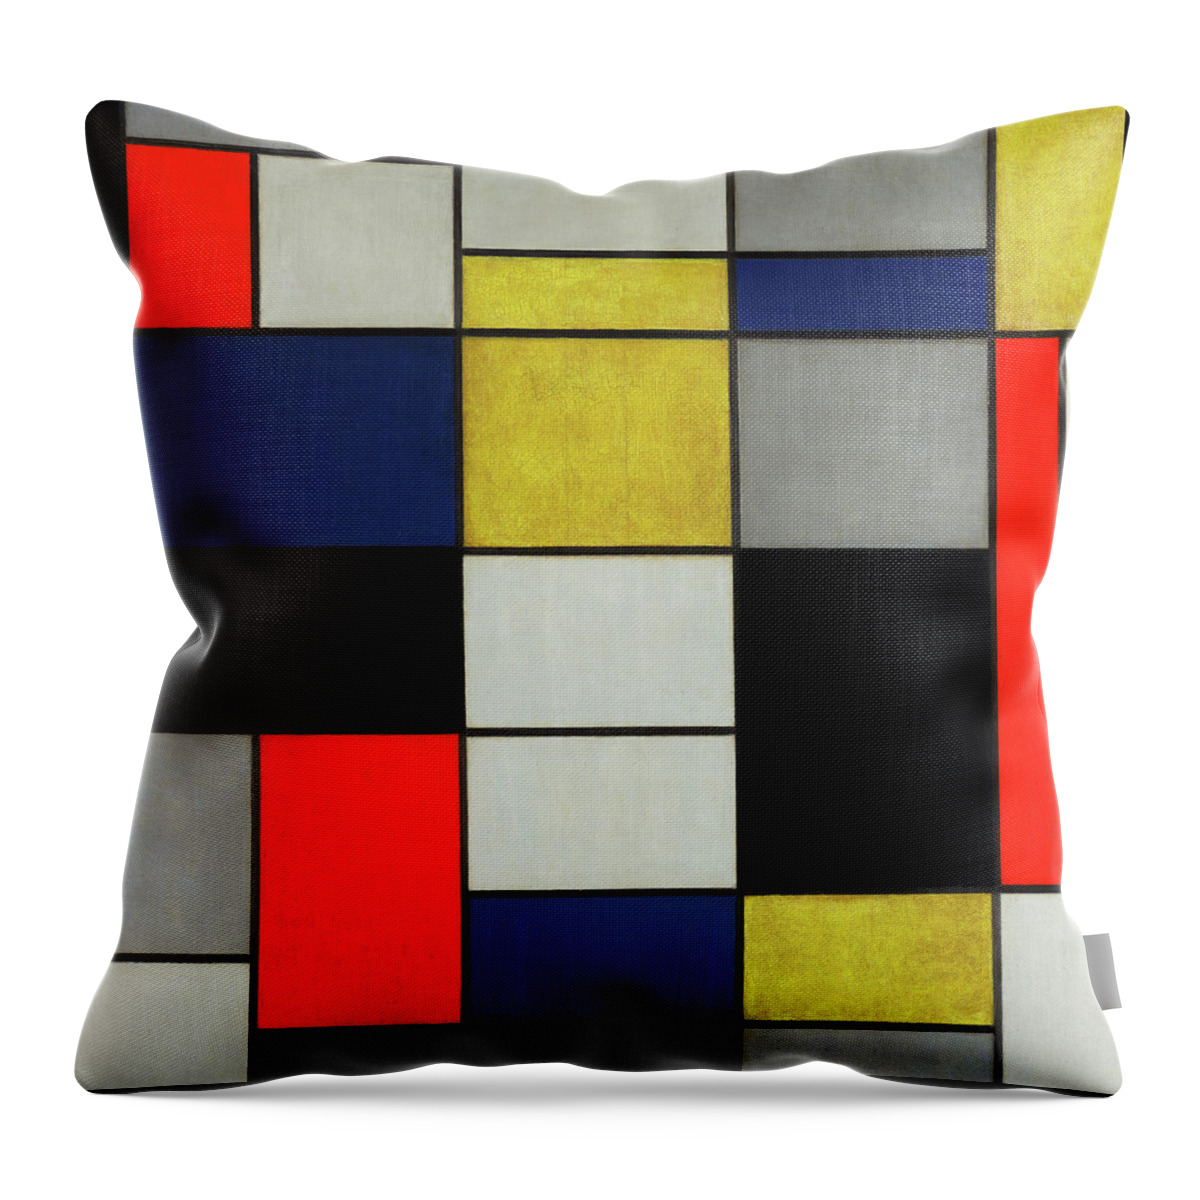 Piet Mondrian Throw Pillow featuring the painting Composition, 1919-1920 by Piet Mondrian